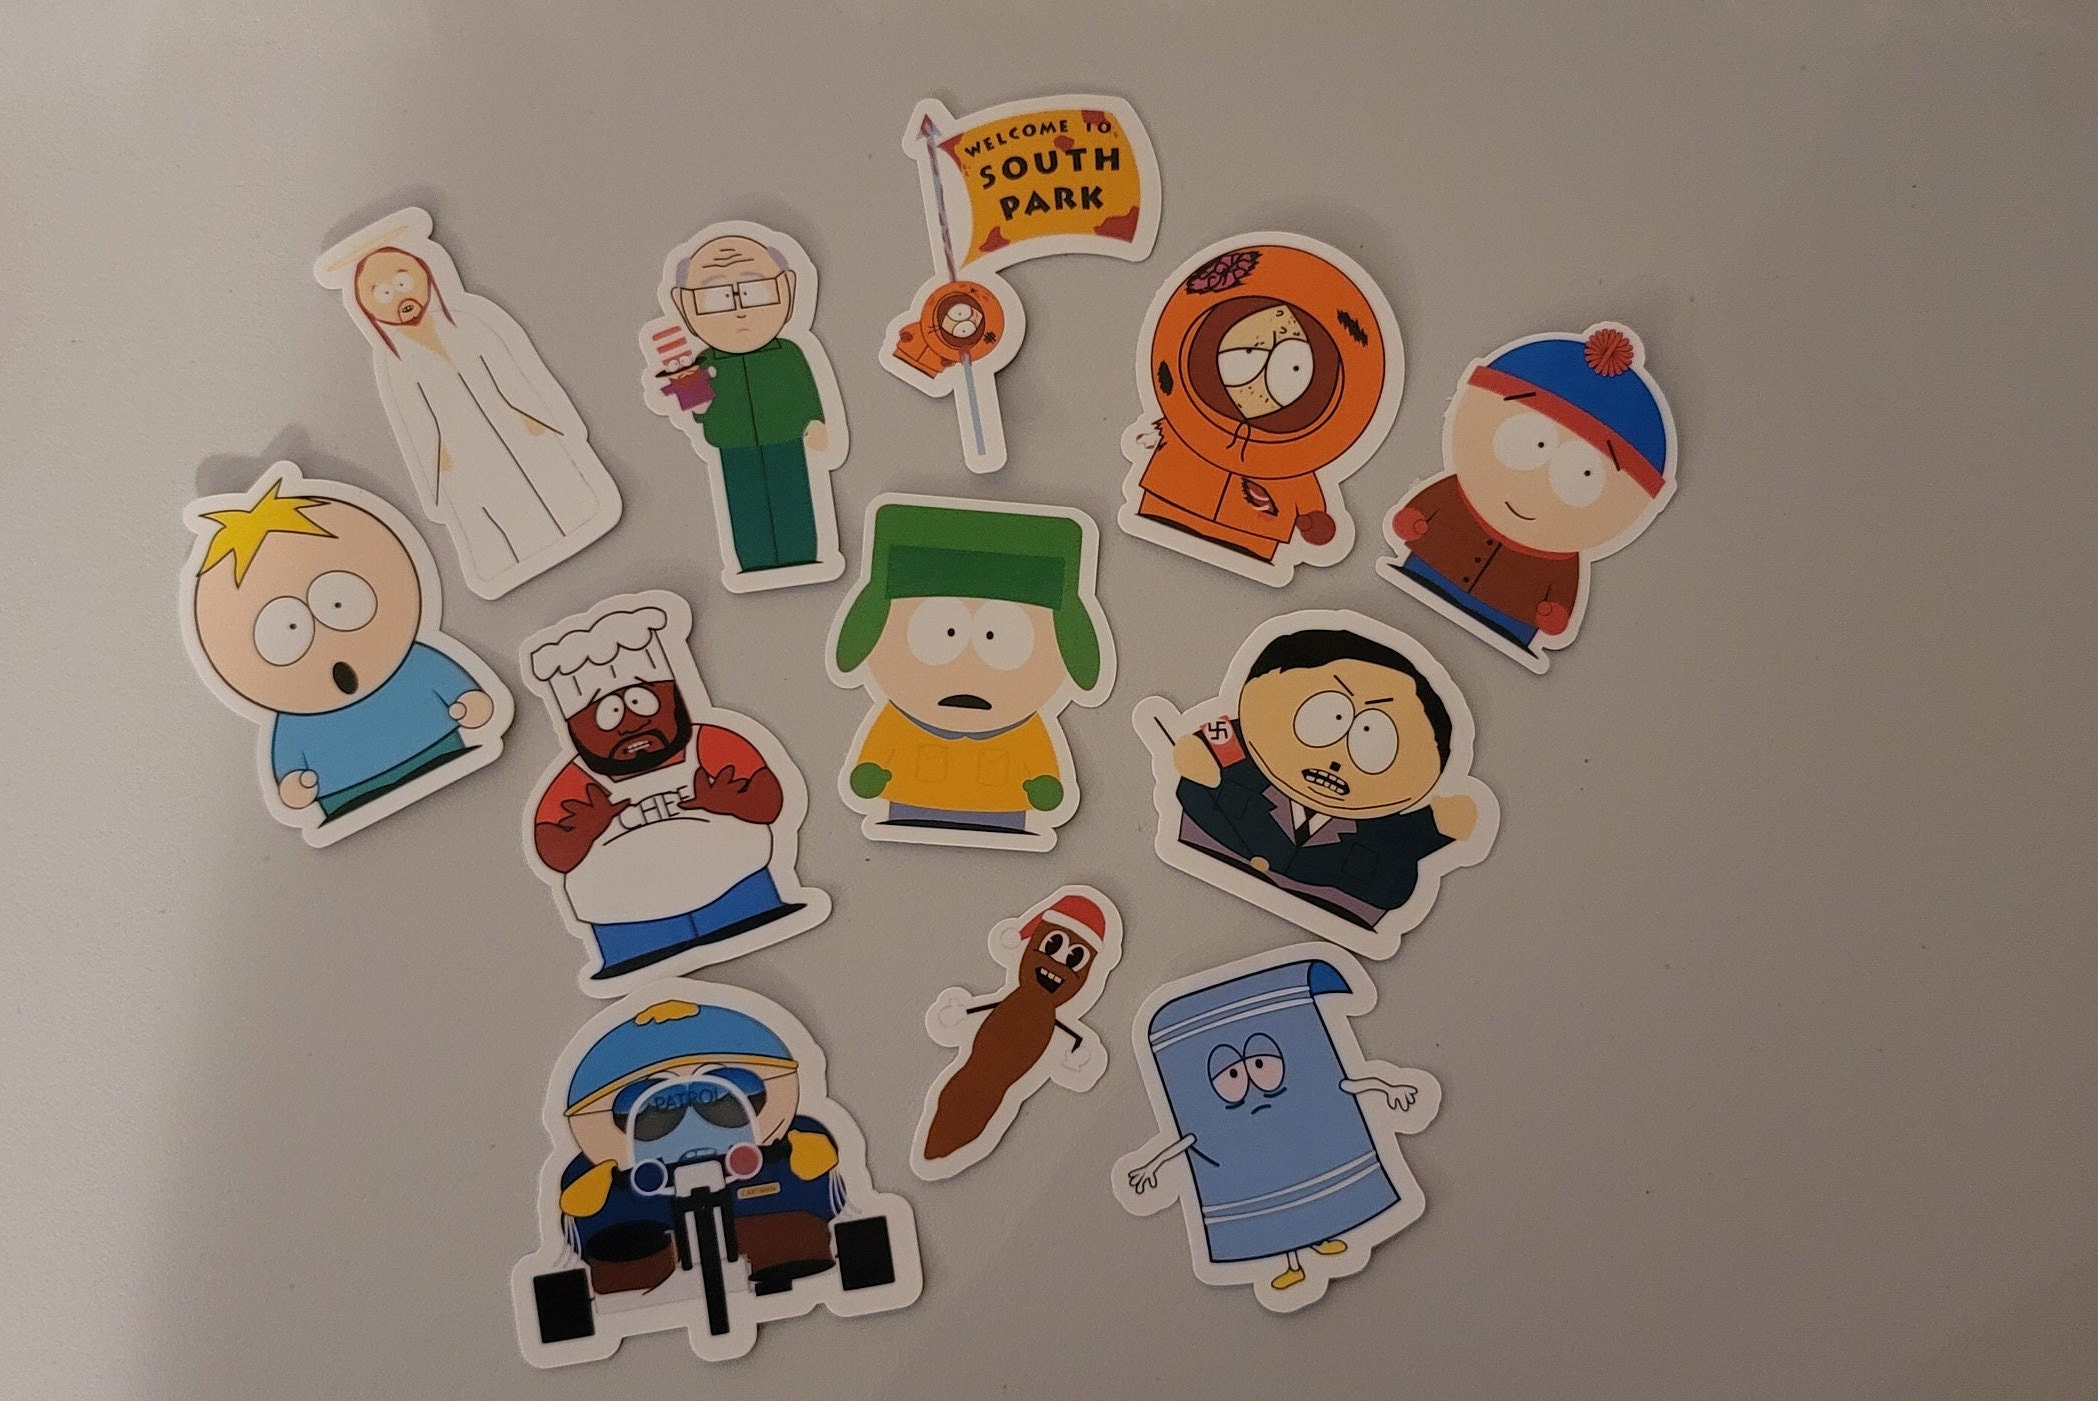 South Park Stickers Vinyl Stickers Waterproof Stickers No REPEATS 